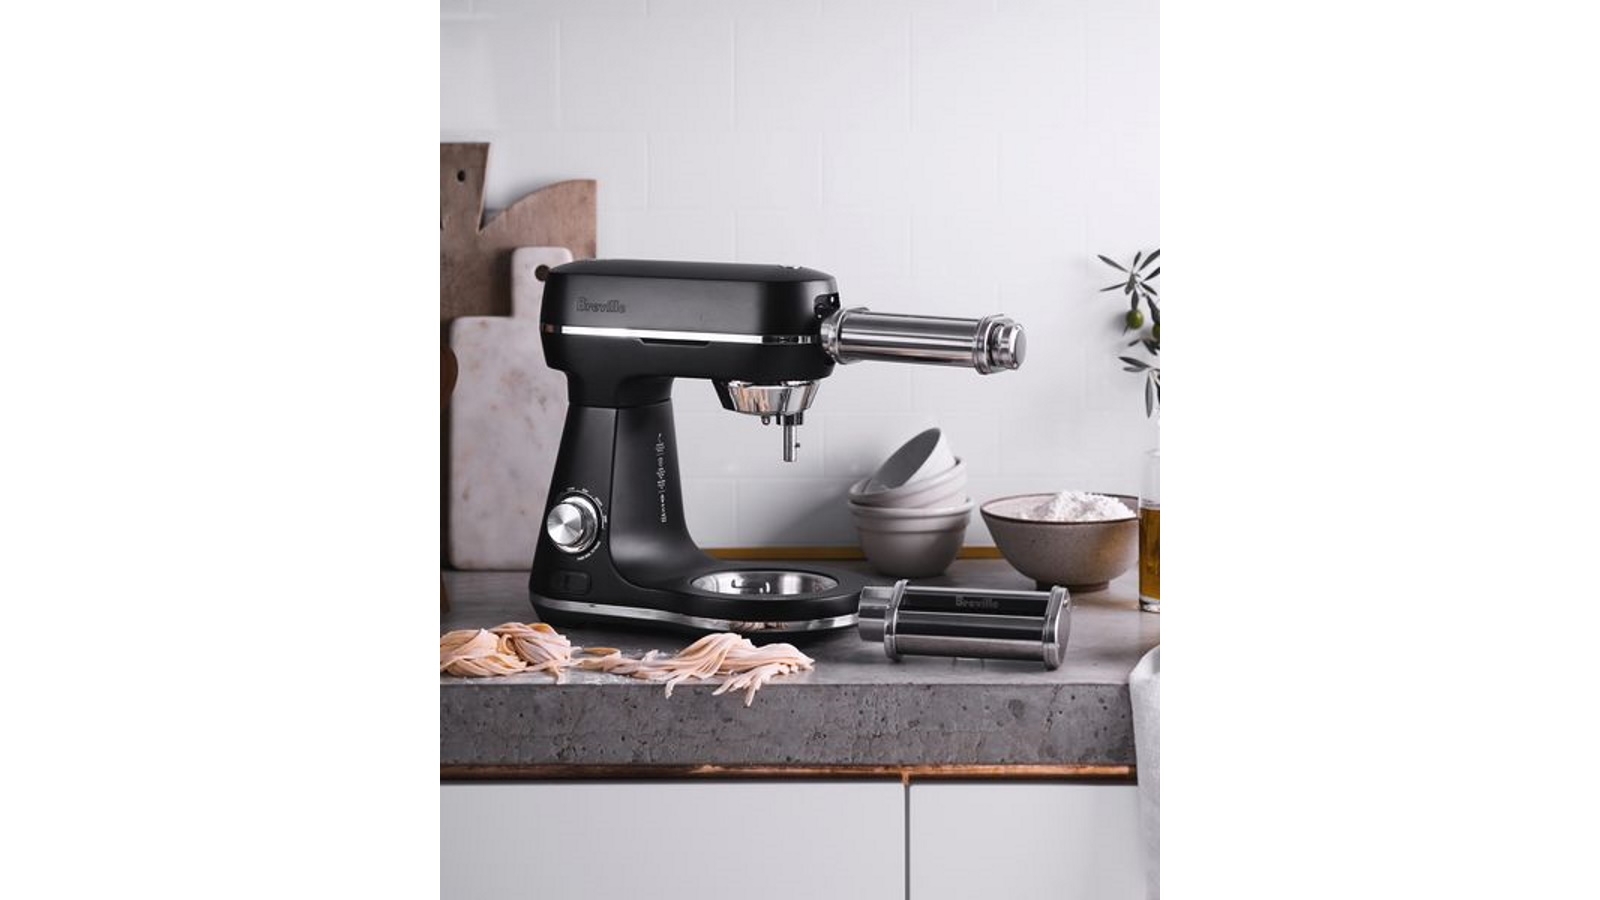 Breville The Bakery Chef Hub Stand Mixer Black Truffle